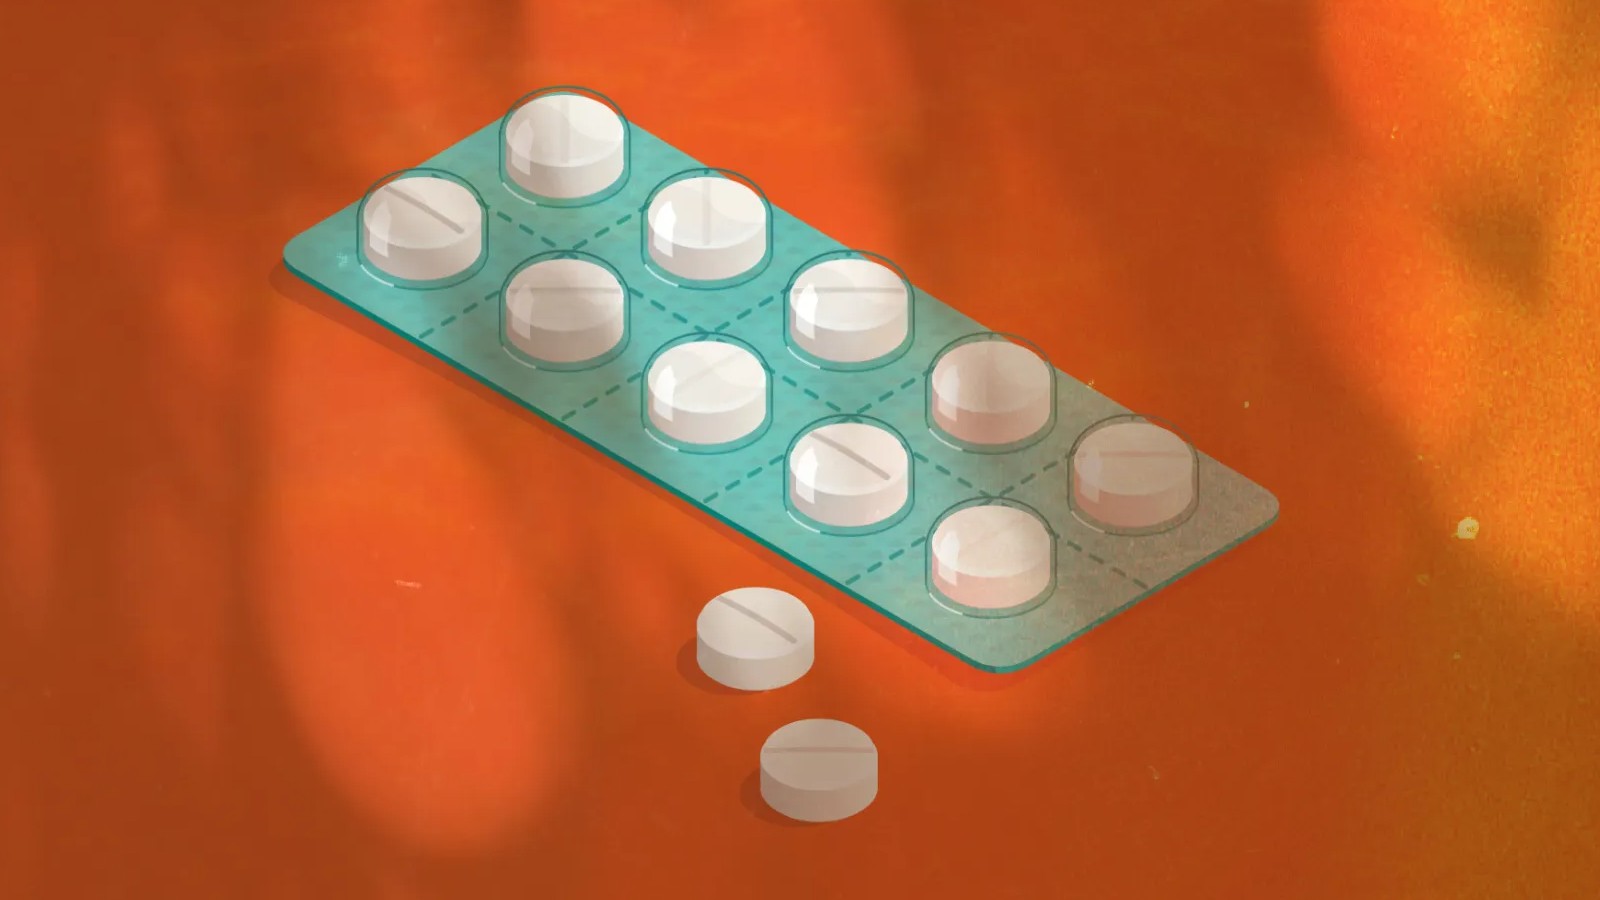 An image of white pills against an orange background